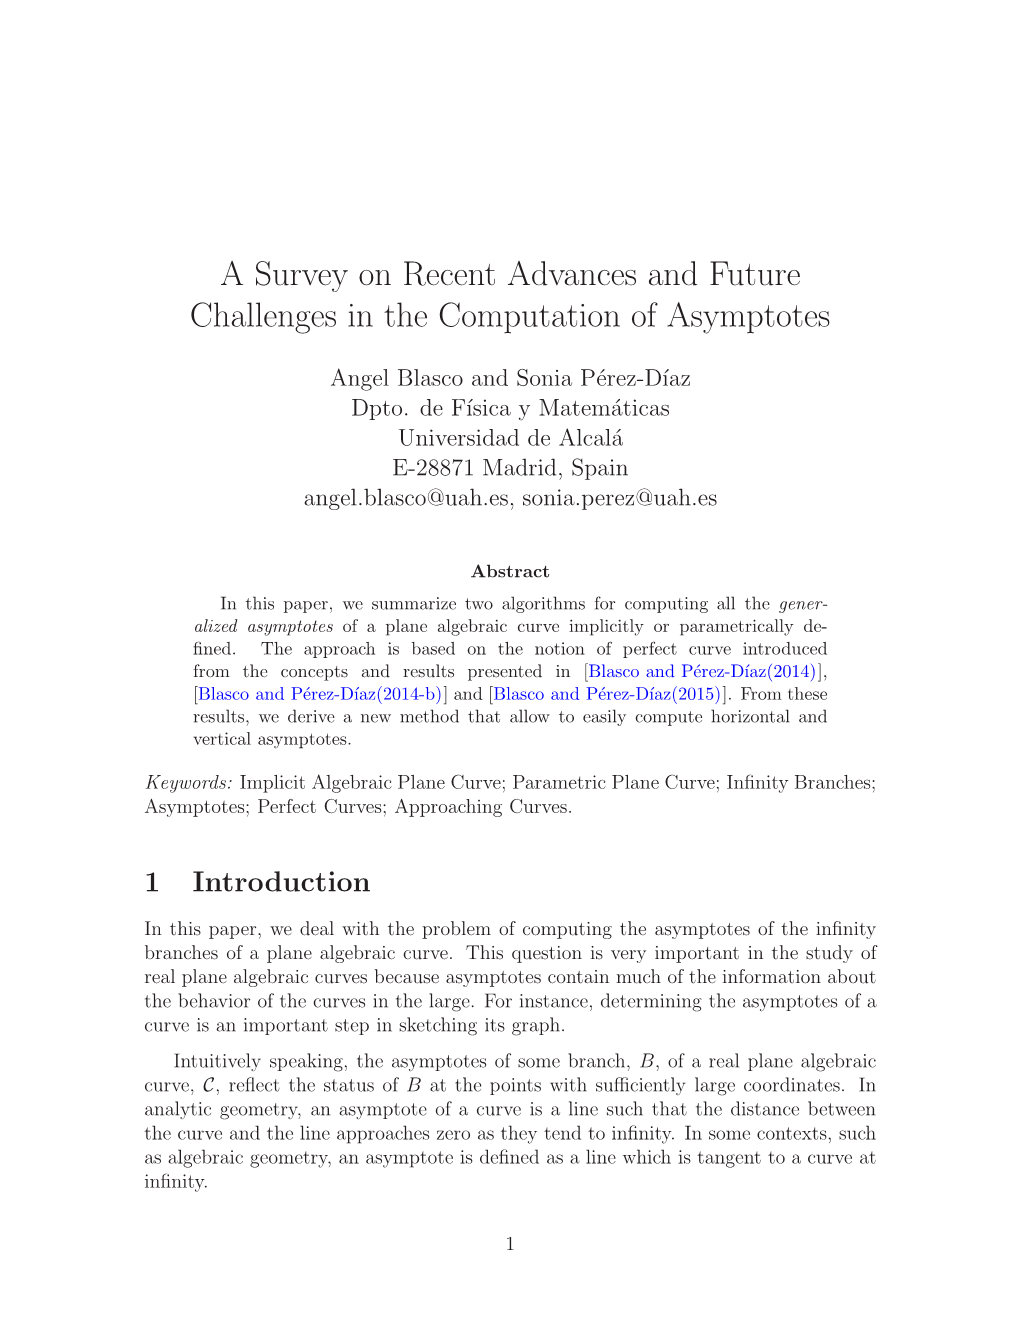 A Survey on Recent Advances and Future Challenges in the Computation of Asymptotes